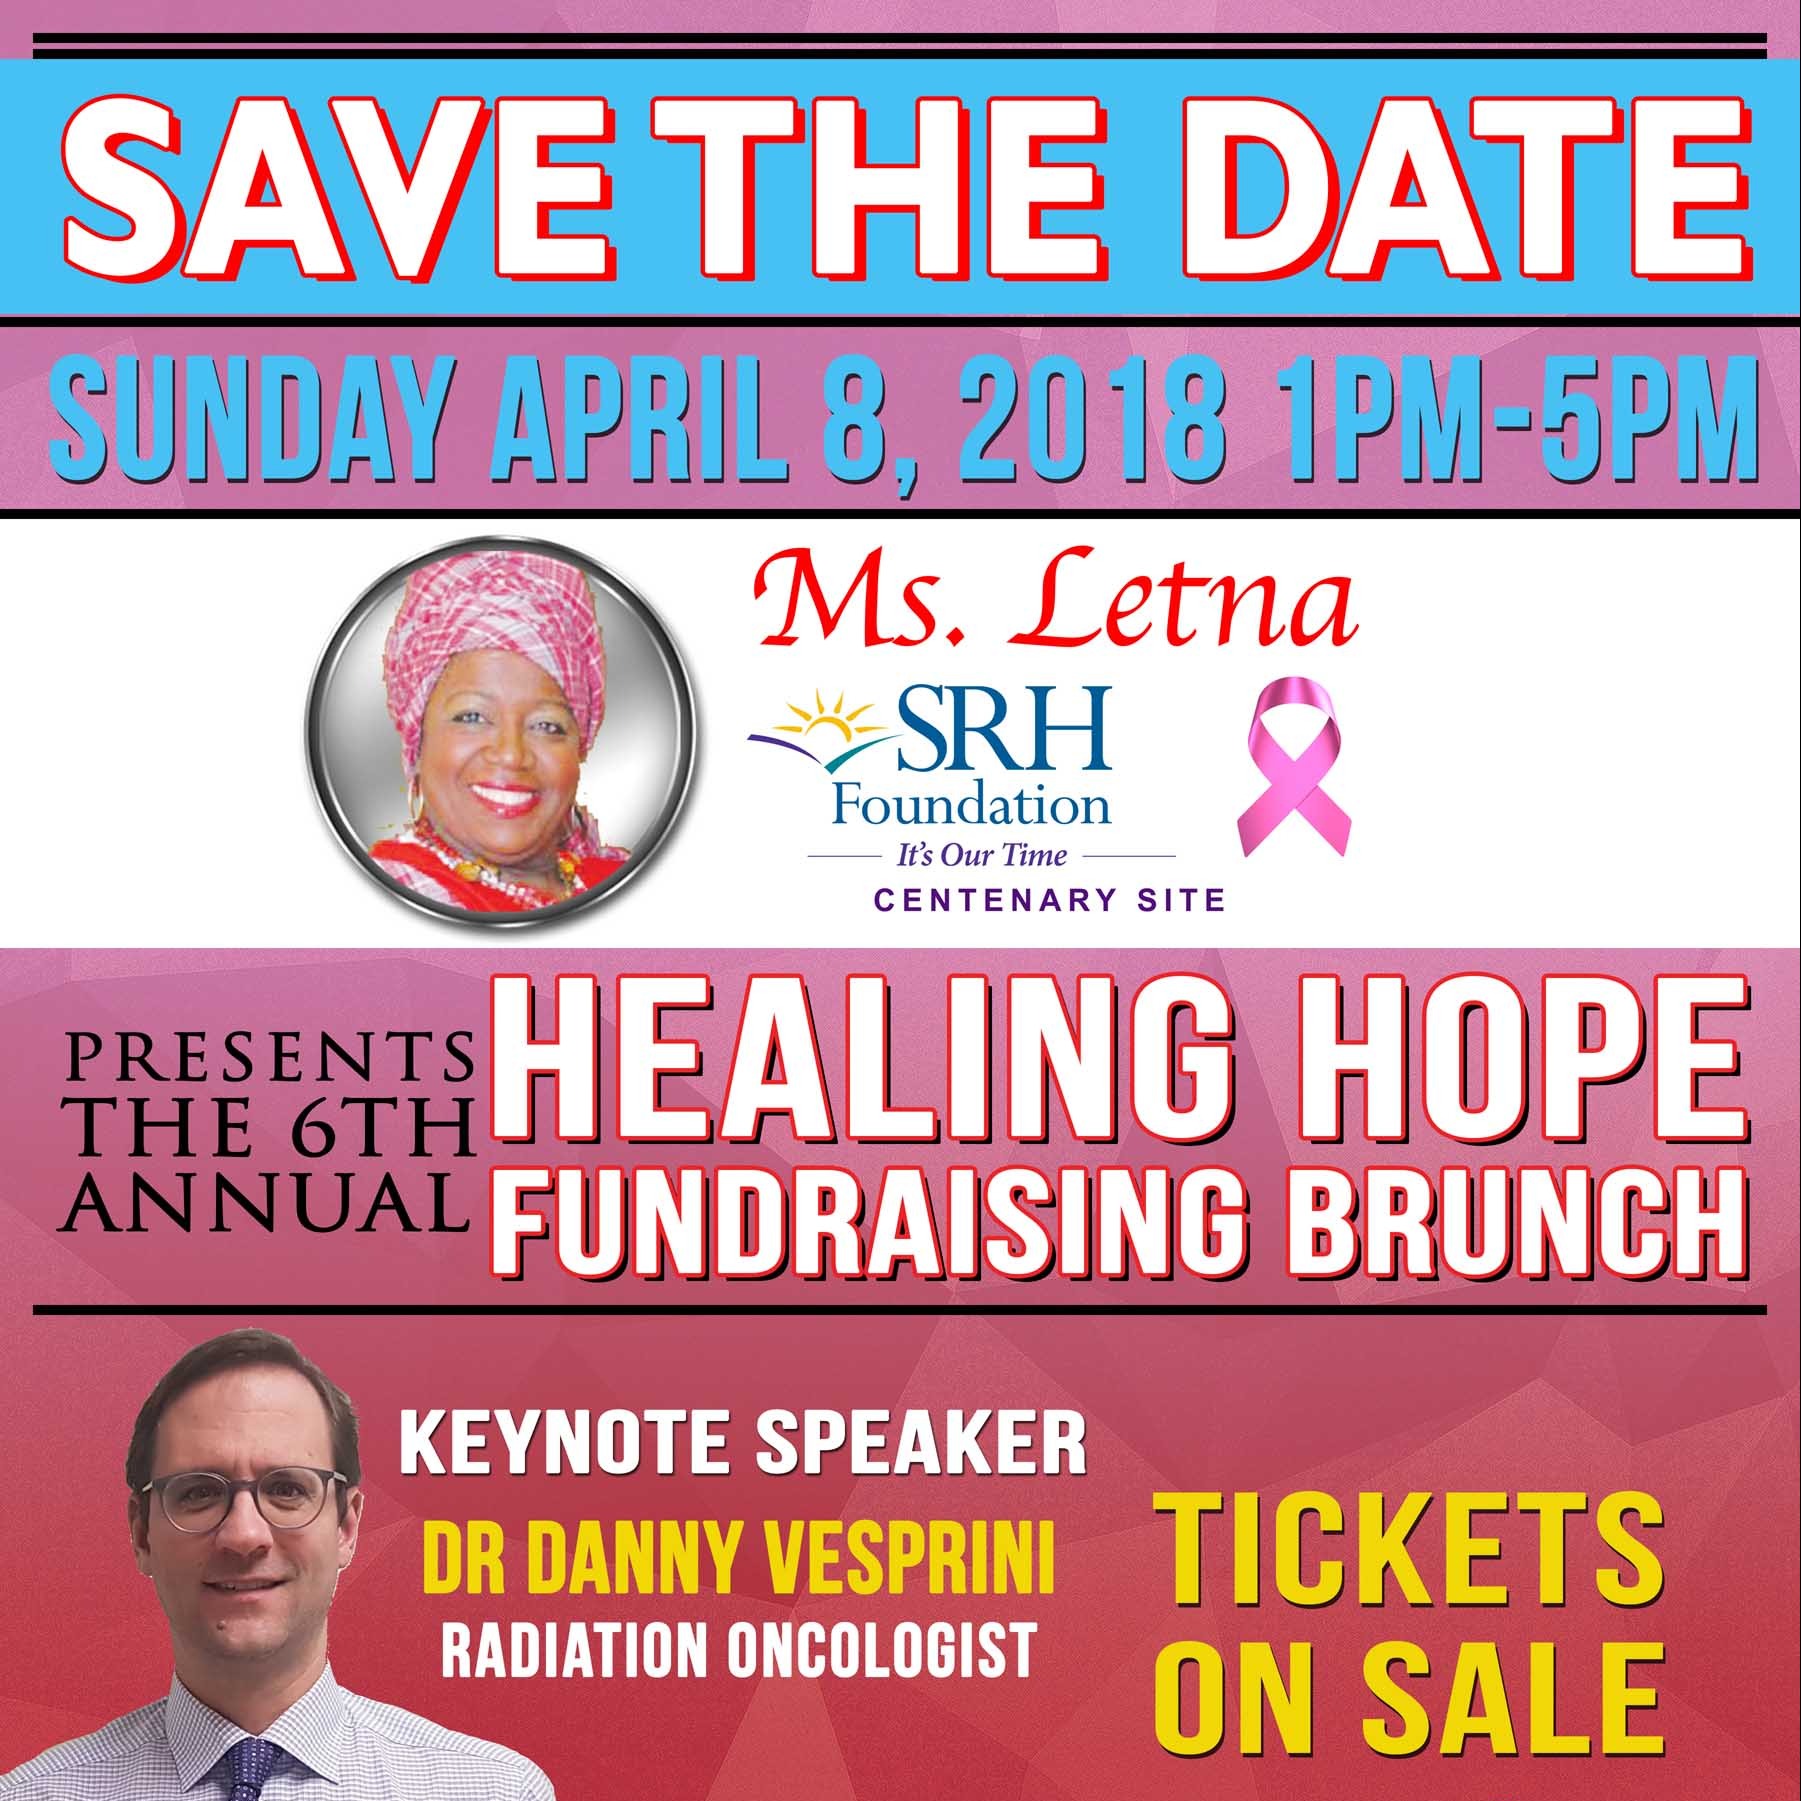 The 6th Annual Healing Hope Fundraising Brunch